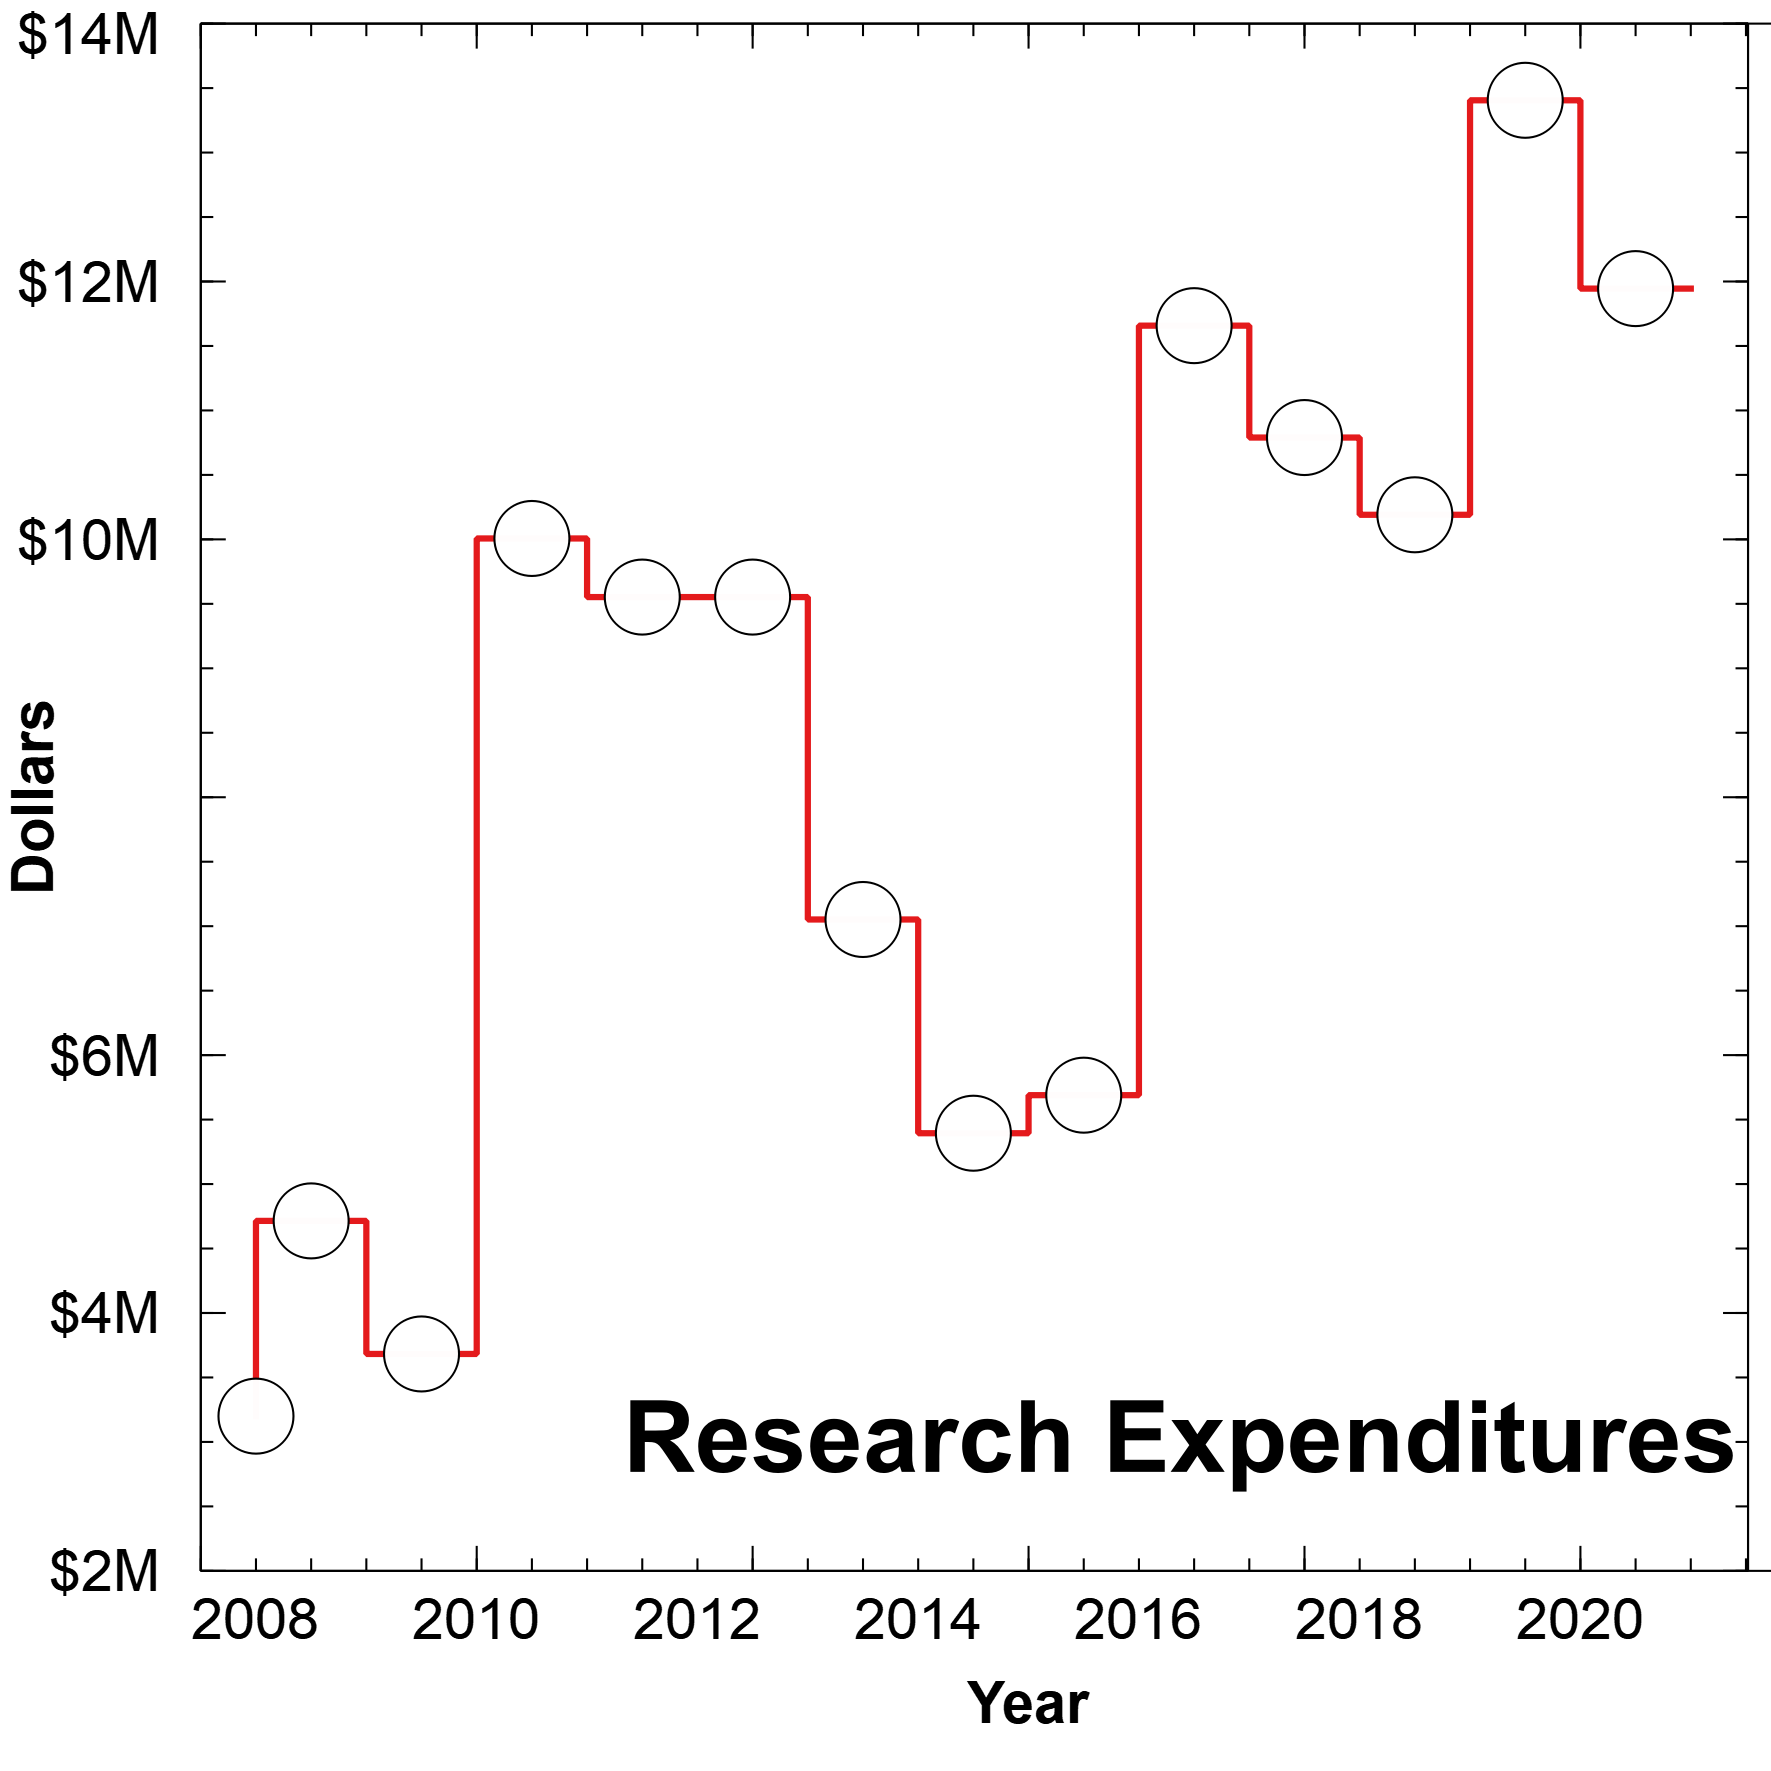 Research Expenditures 2021